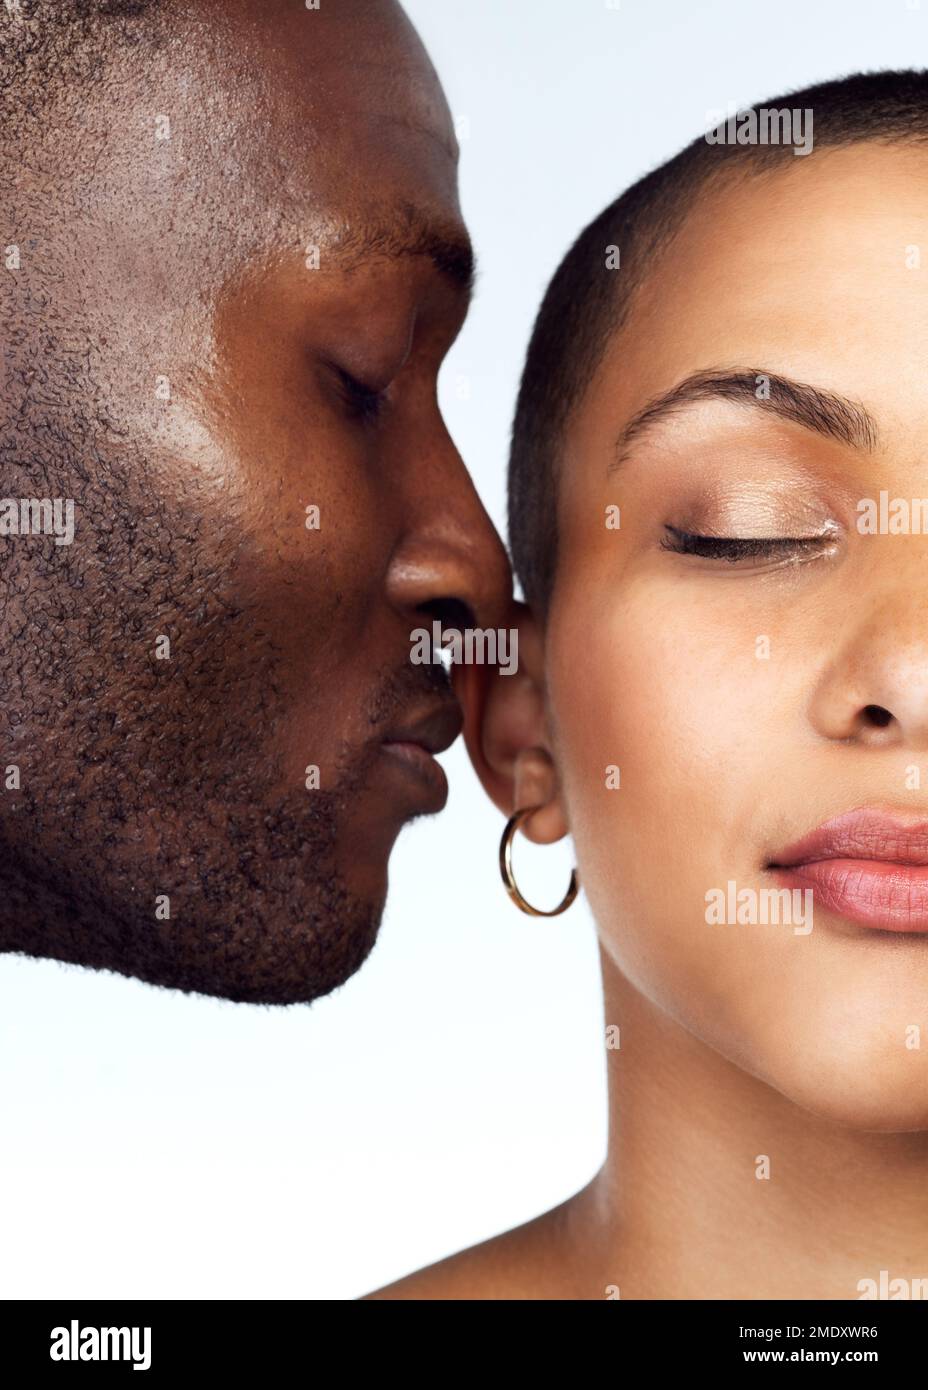 The scent of love lingers all around us. Studio shot of a couple posing with their eyes closed against a grey background. Stock Photo